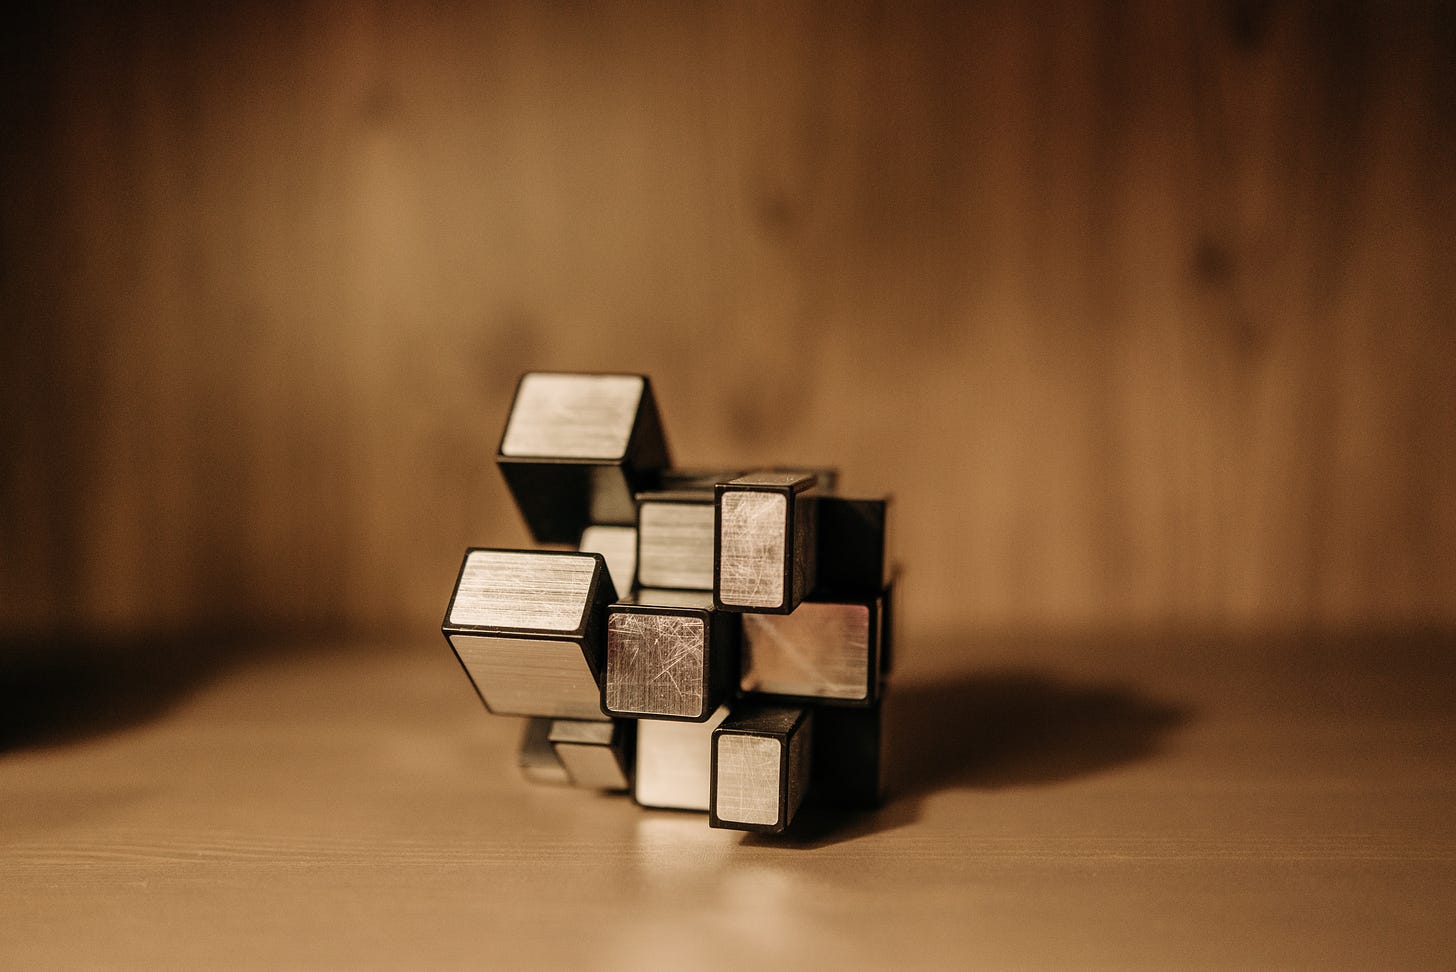 3D Rubik's Cube in Close-up Photography